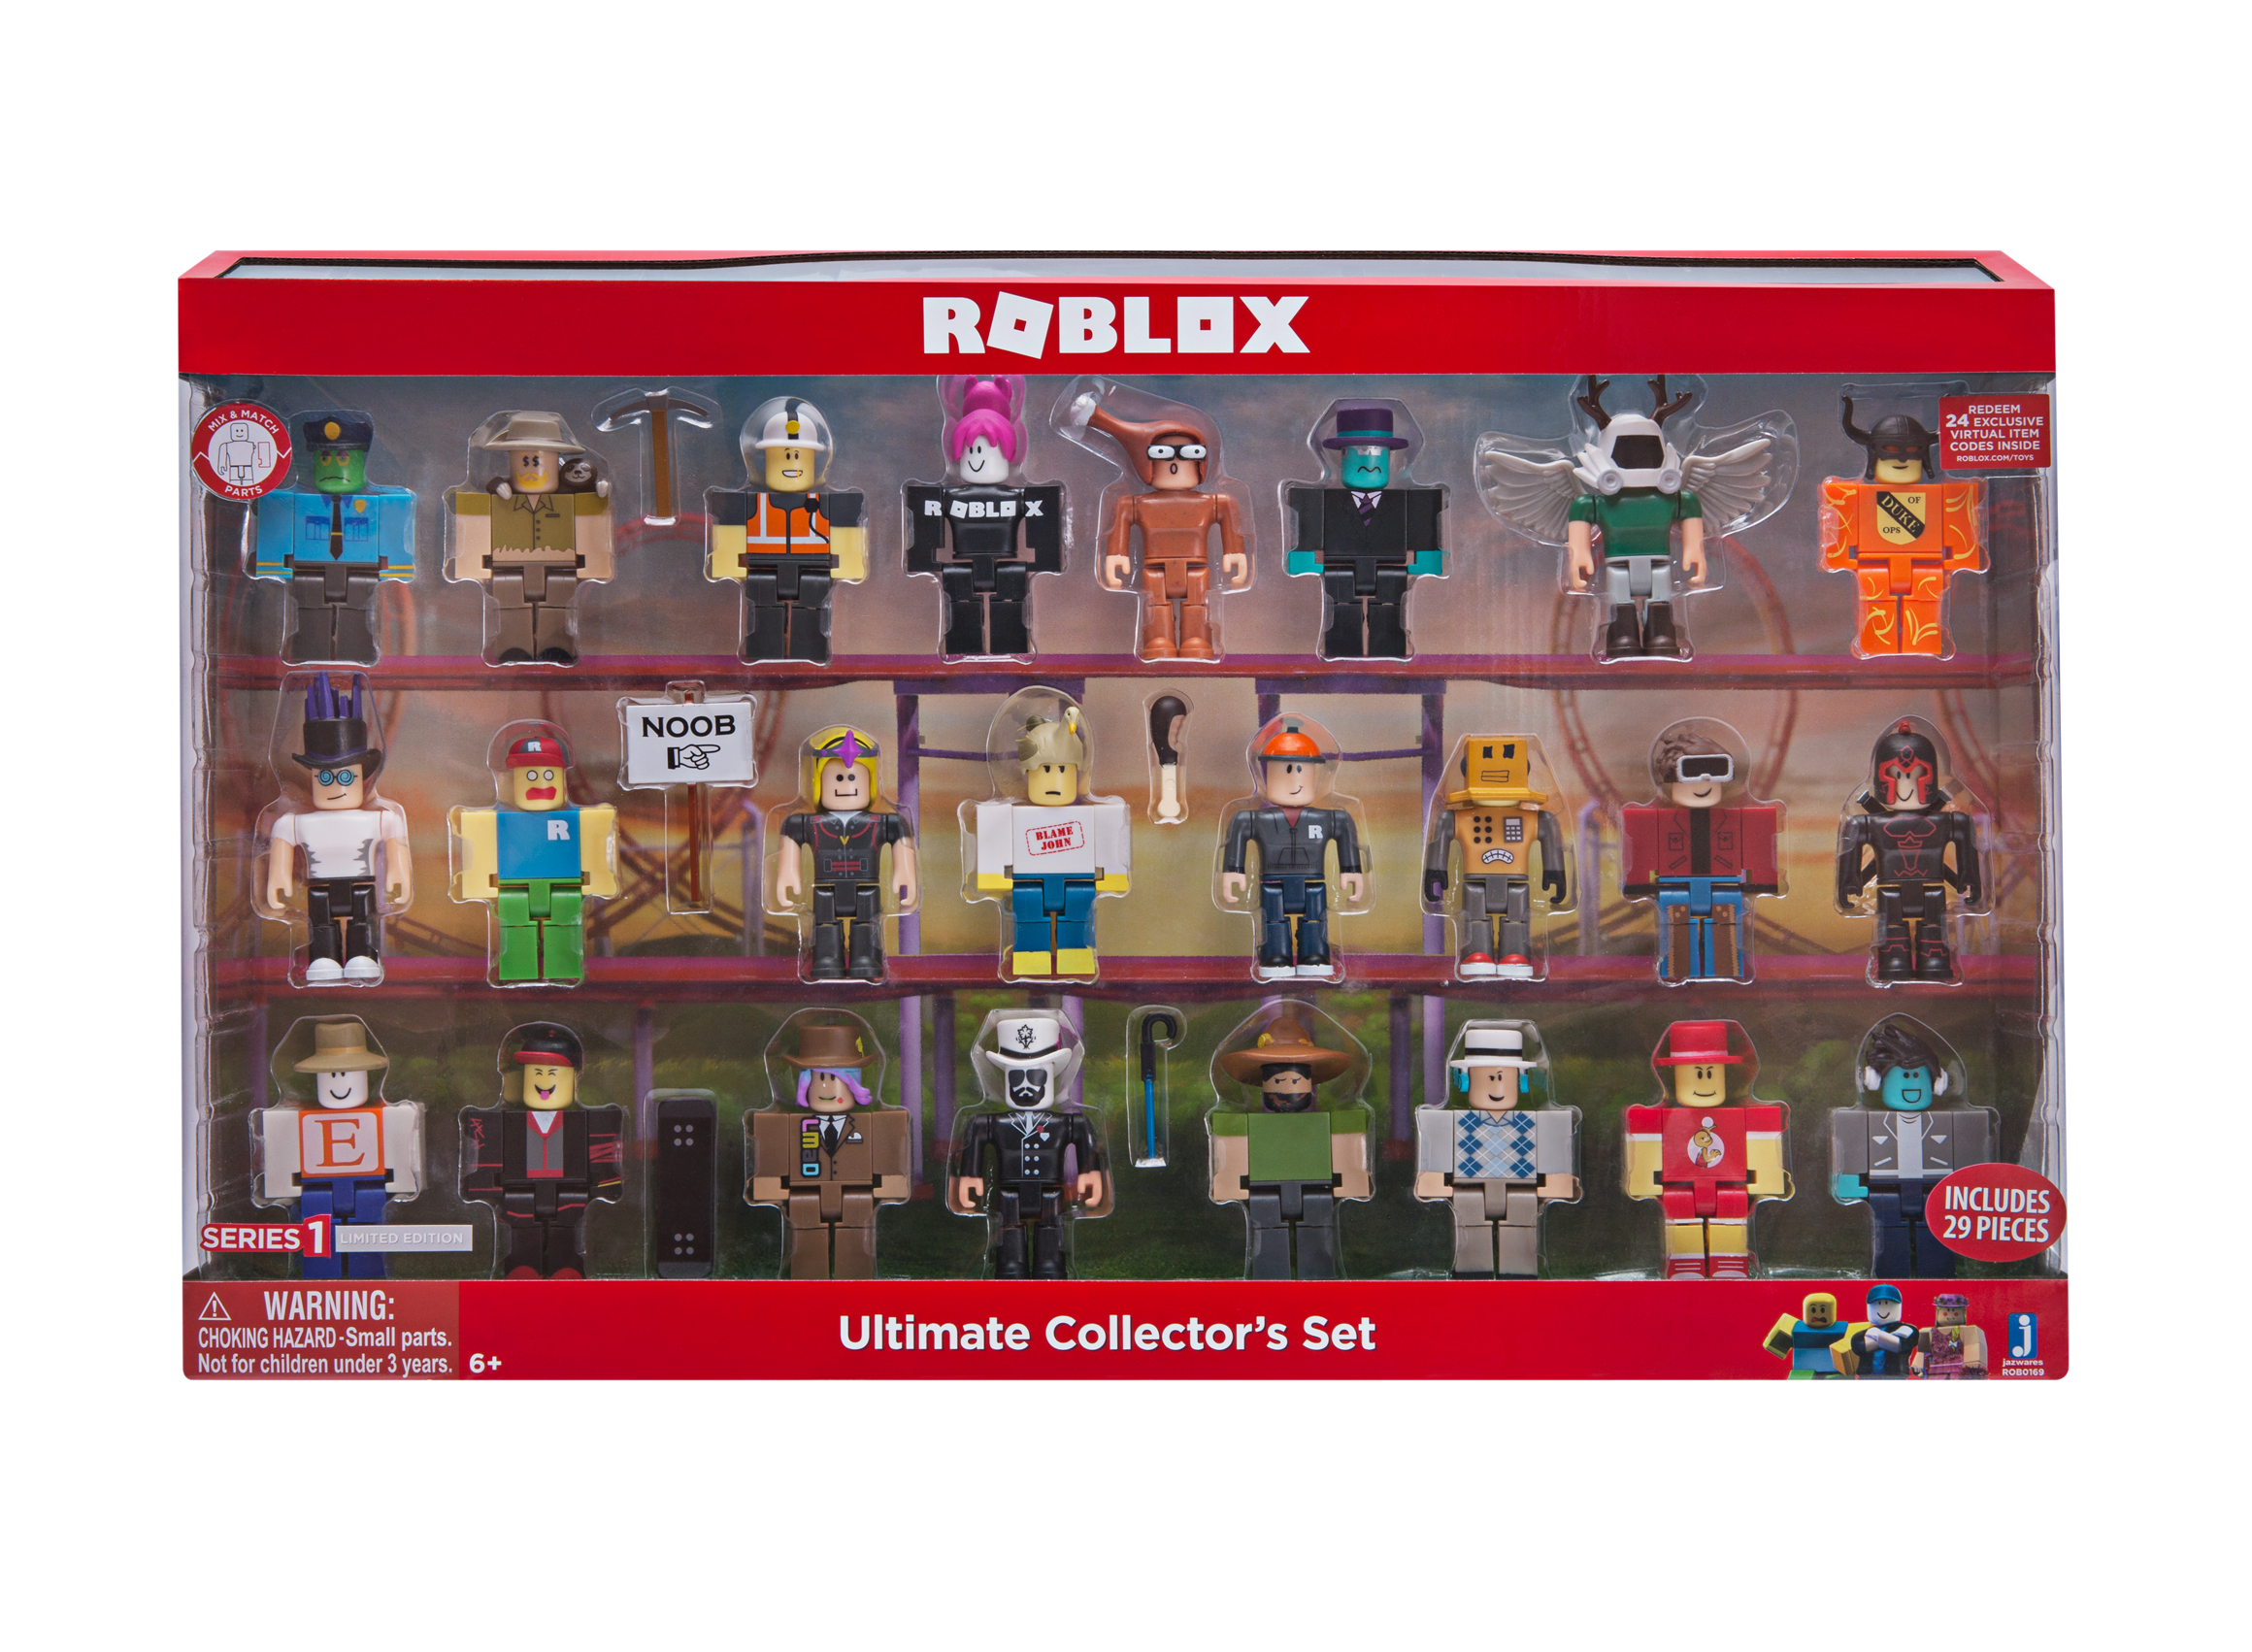 Playsets Action Toy Figures Roblox Ultimate Collectors Set Series 2 Playsets Vehicles Playsets - new roblox toys defaultio series 2 box figures w virtual